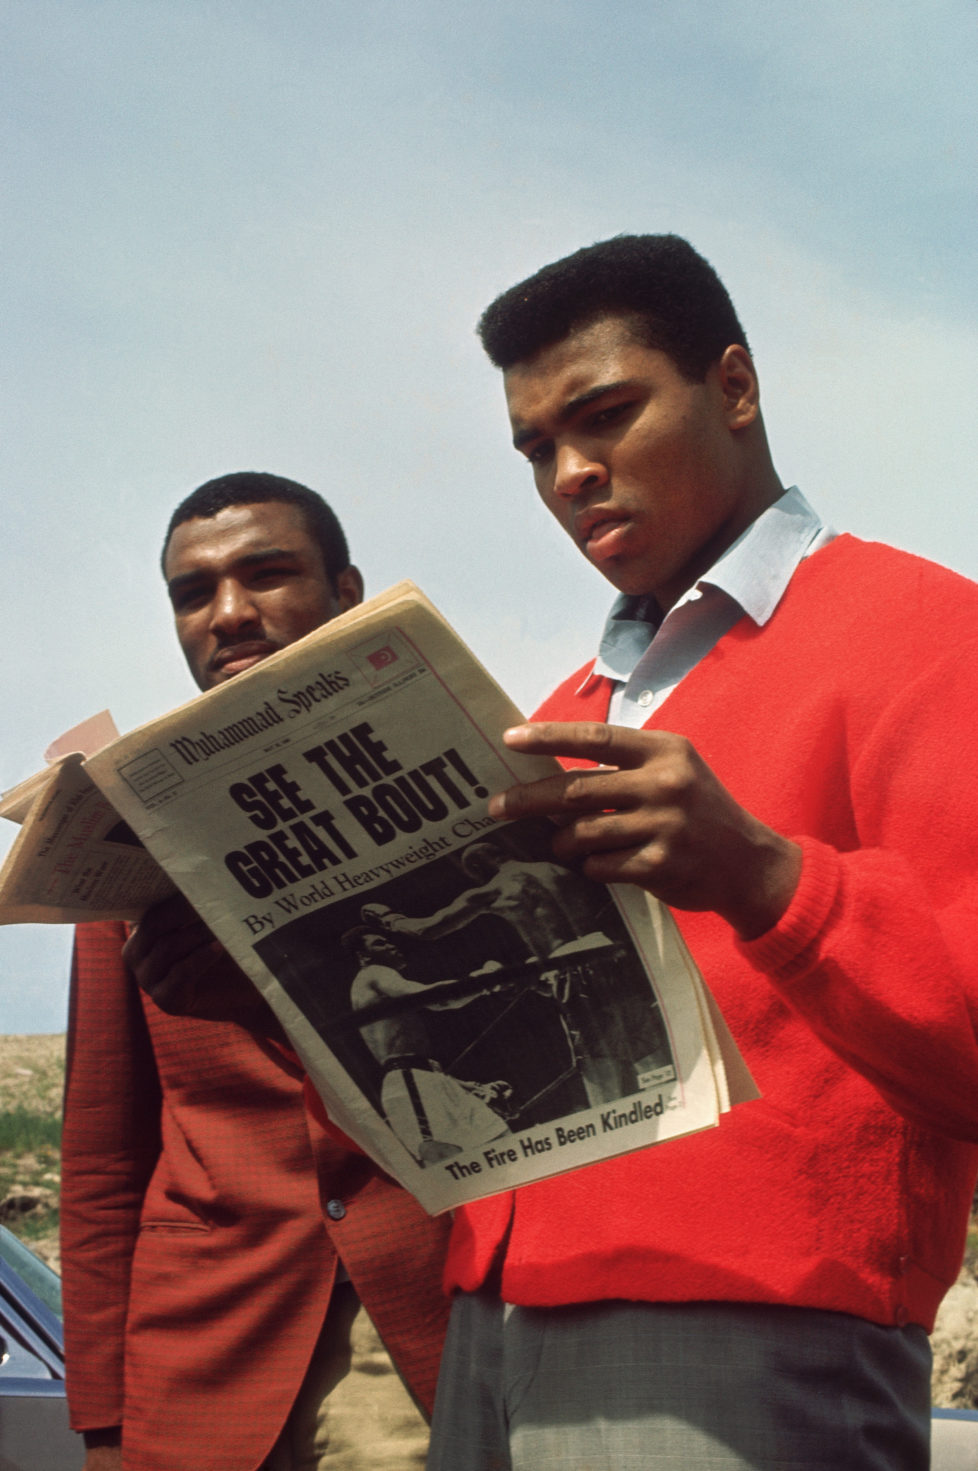 UNDATED: Muhammad Ali reads about his boxing match in the paper circa 1960's. (Photo by Focus on Sport/Getty Images)